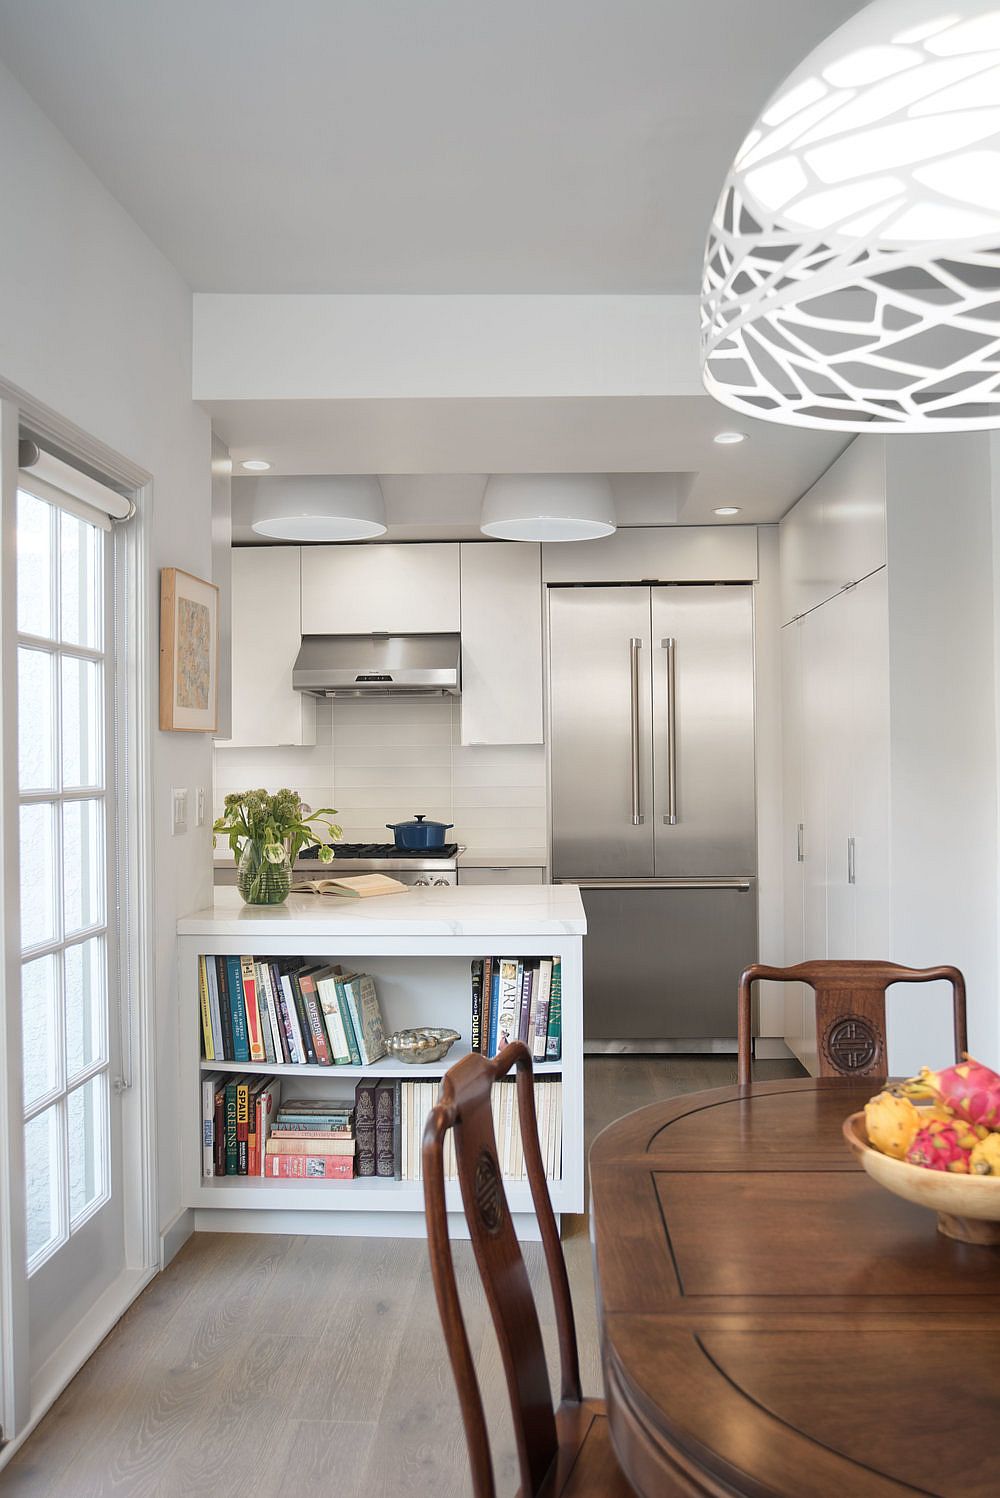 Open shelving allows you to redecorate the kitchen with ease